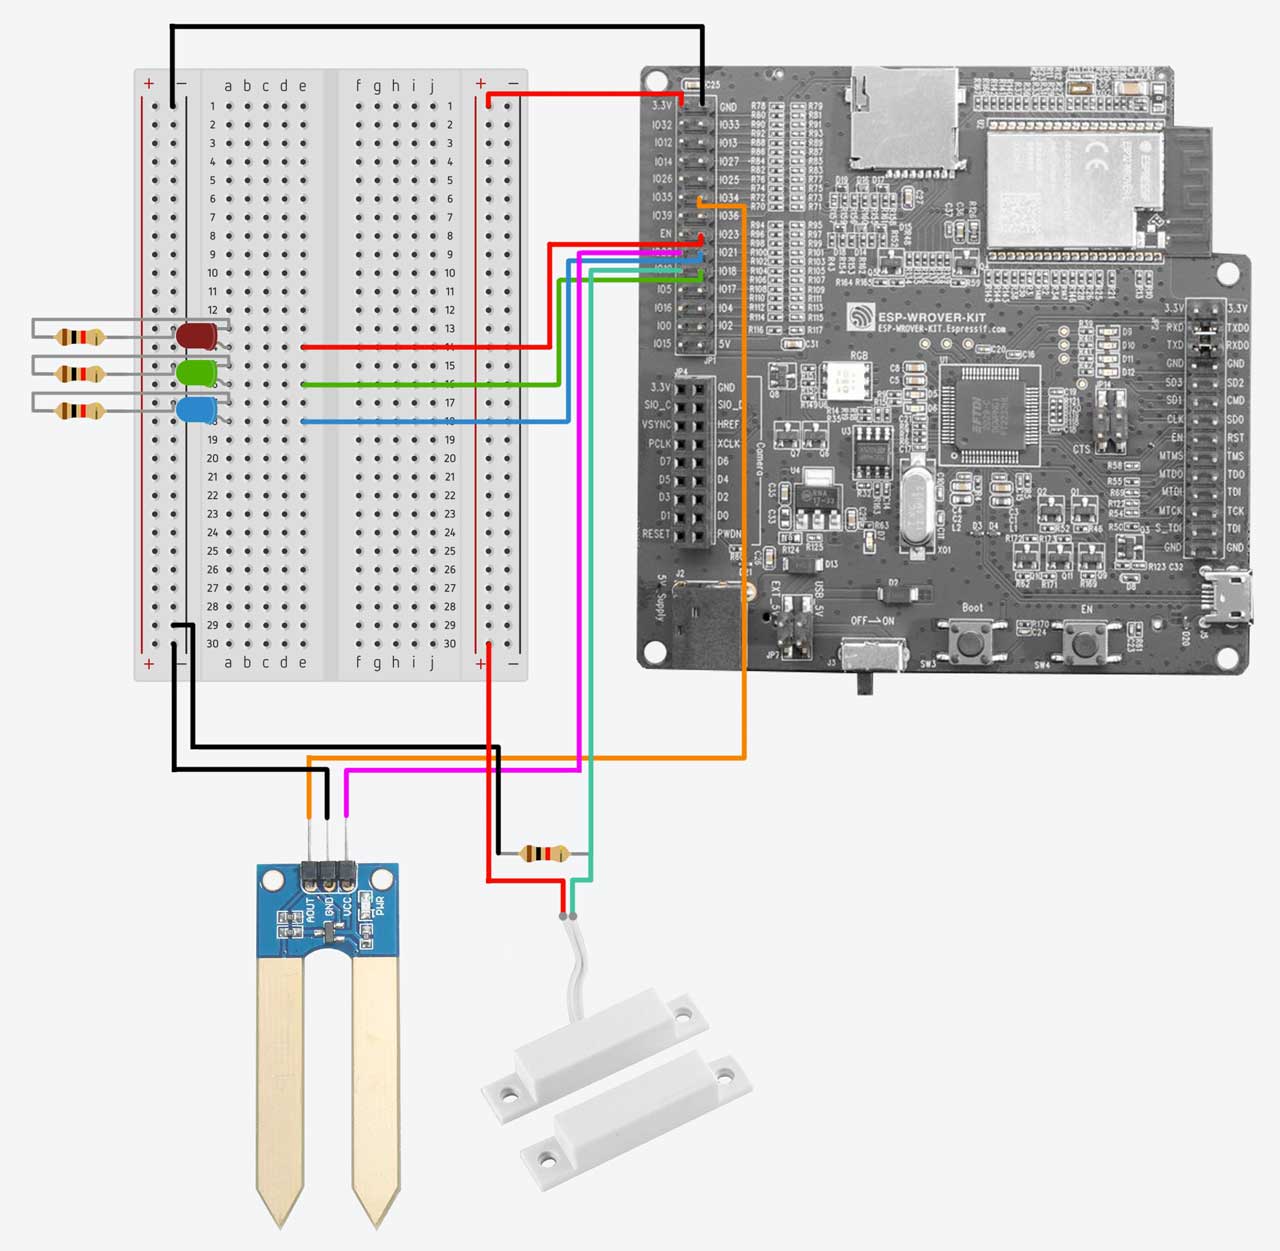 ESP32 Wiring Diagram for LEDs, Moisture Sensor, and Contact Switch